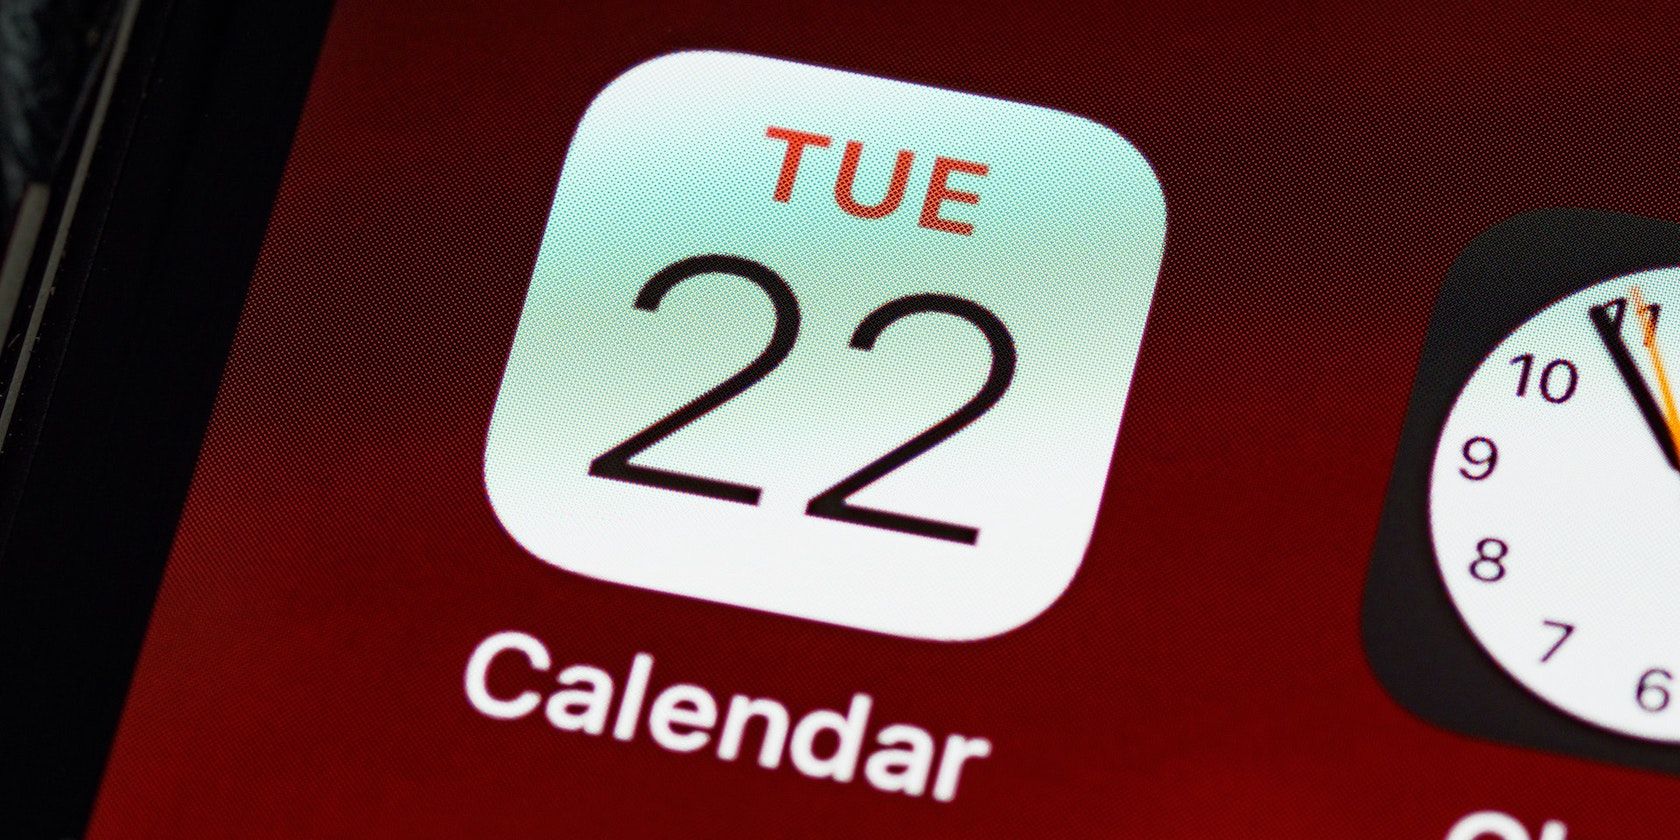 The Calendar App on iPhone Showing 22